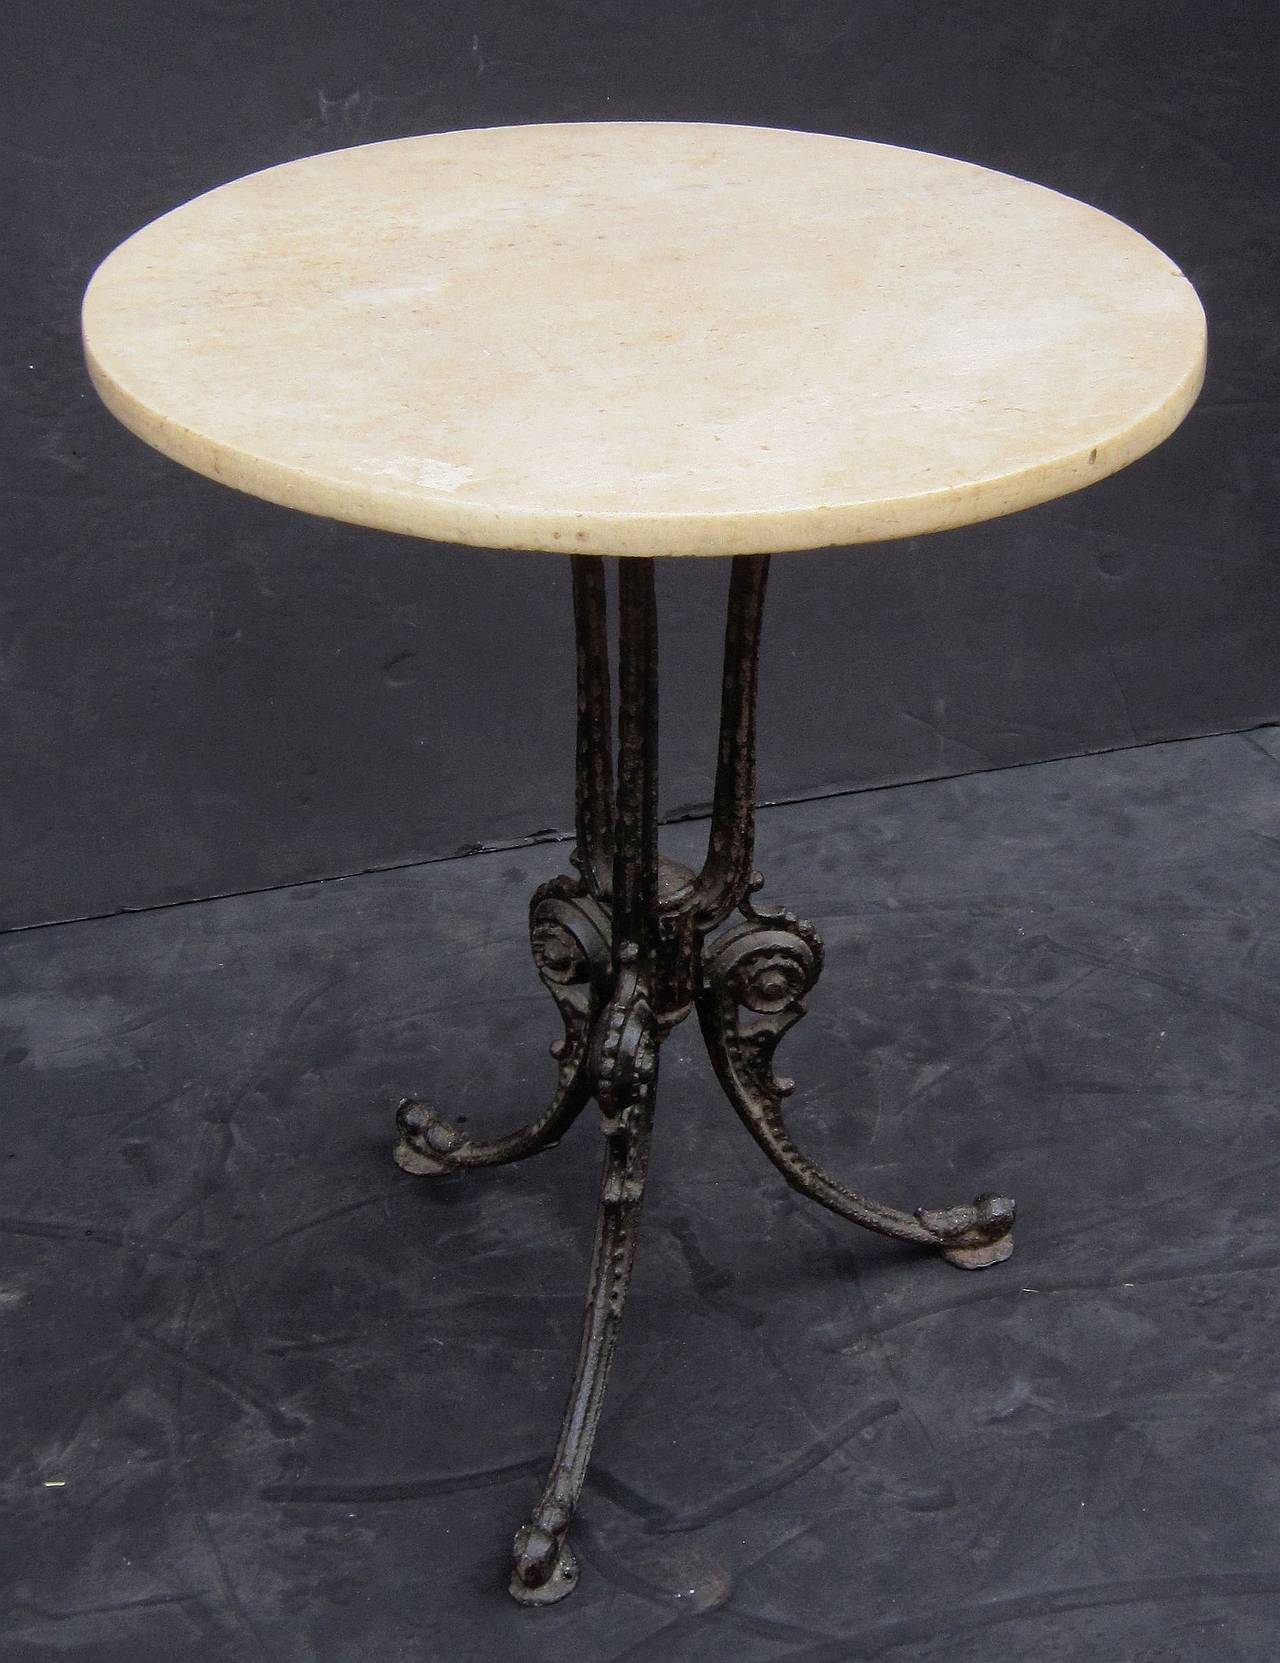 A handsome English bistro table featuring a round or circular marble top mounted to a tripod pedestal base of cast iron with a decorative scroll design.

Great for a garden or patio!